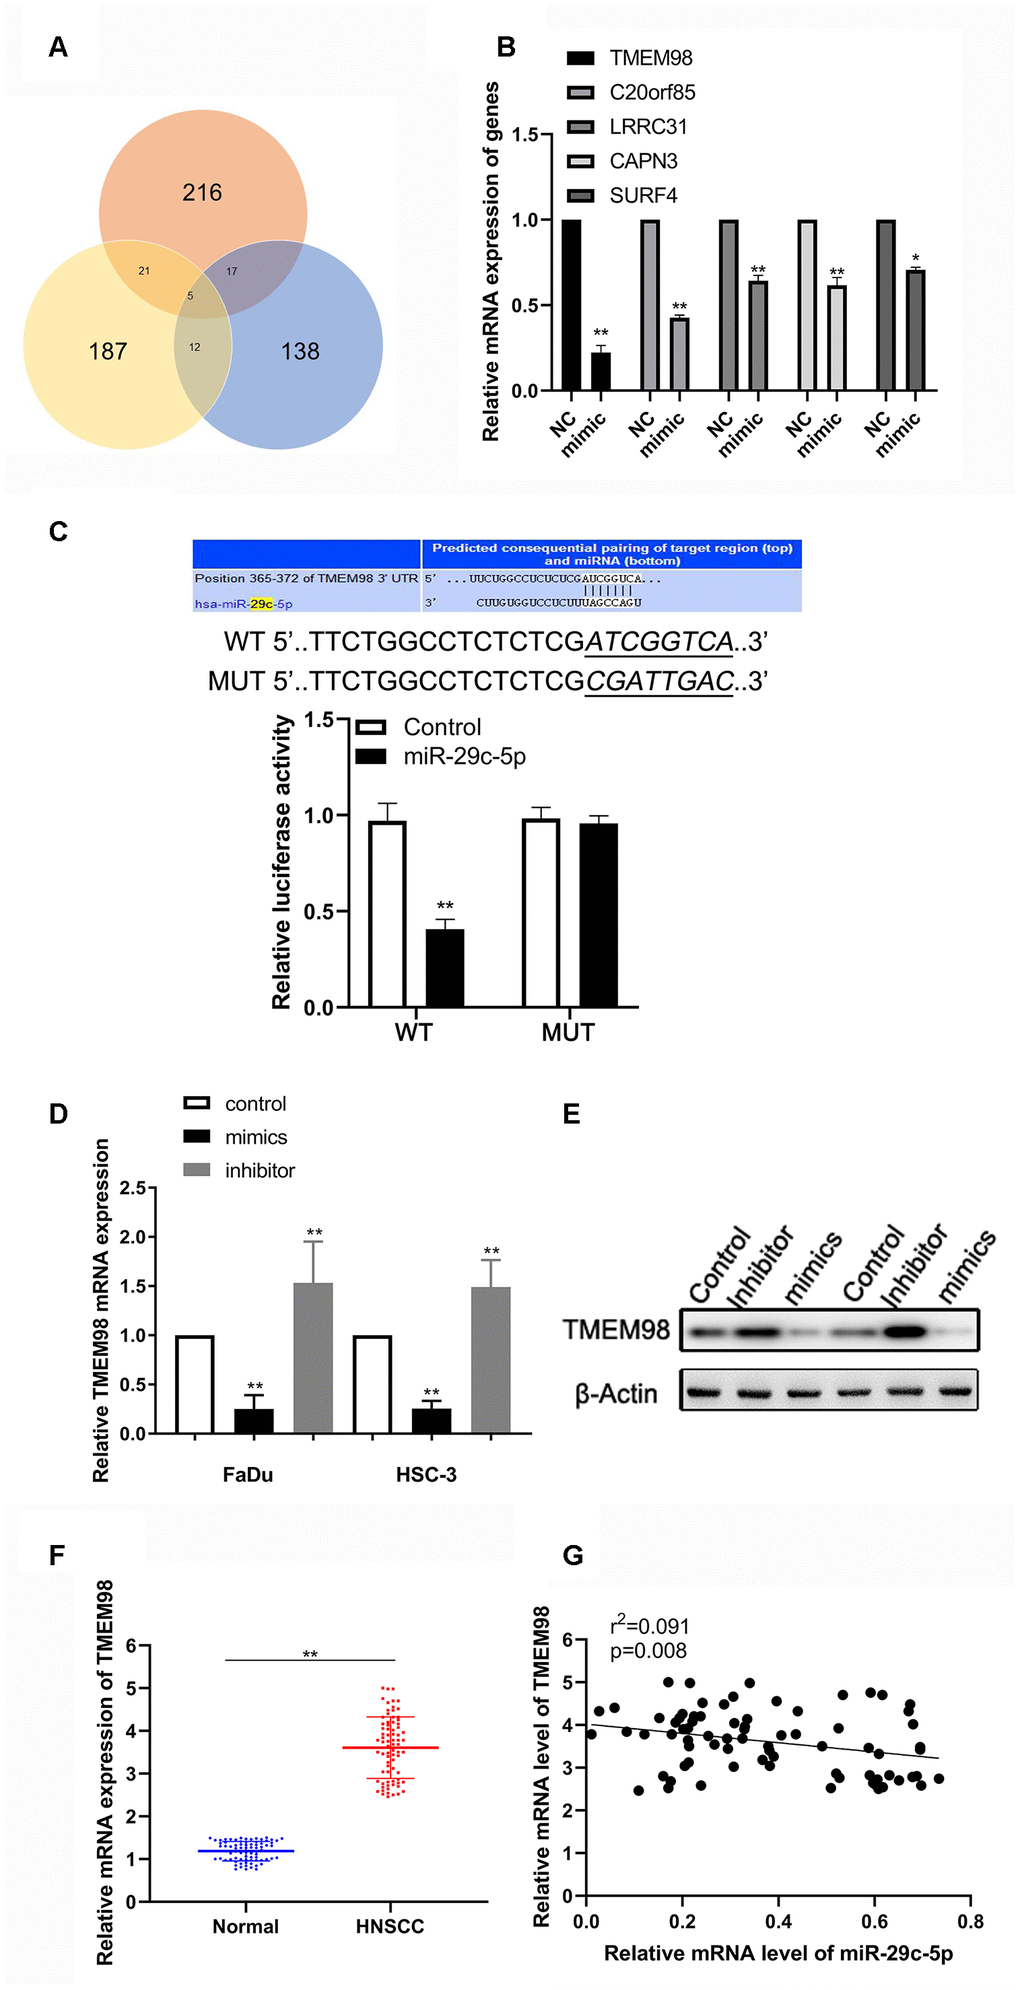 miR-29c-5p directly targets the 3´-UTR of TMEM98 mRNA to modulate TMEM98 expression. (A) Analysis of the three bioinformatics databases showing the number of potential has-miR-29c-target genes. (B) Relative mRNA levels of five potential has-miR-29c-target genes in cells transfected with the has-miR-29c mimic vs the control. (C) The Upper is the putative binding site of miR-29c-5p in the 3´-UTR of TMEM98 mRNA. The lower is the relative luciferase activities of wild-type and mutant TMEM98 reporters in FaDu and HSC-3 cells. (D, E) mRNA and protein levels of TMEM98 in FaDu and HSC-3 cells transfected with the miR-29c-5p mimic or inhibitor. (F, G) mRNA levels of TMEM98 and their association with has-miR-29c levels in HNSCC tissues. *p 